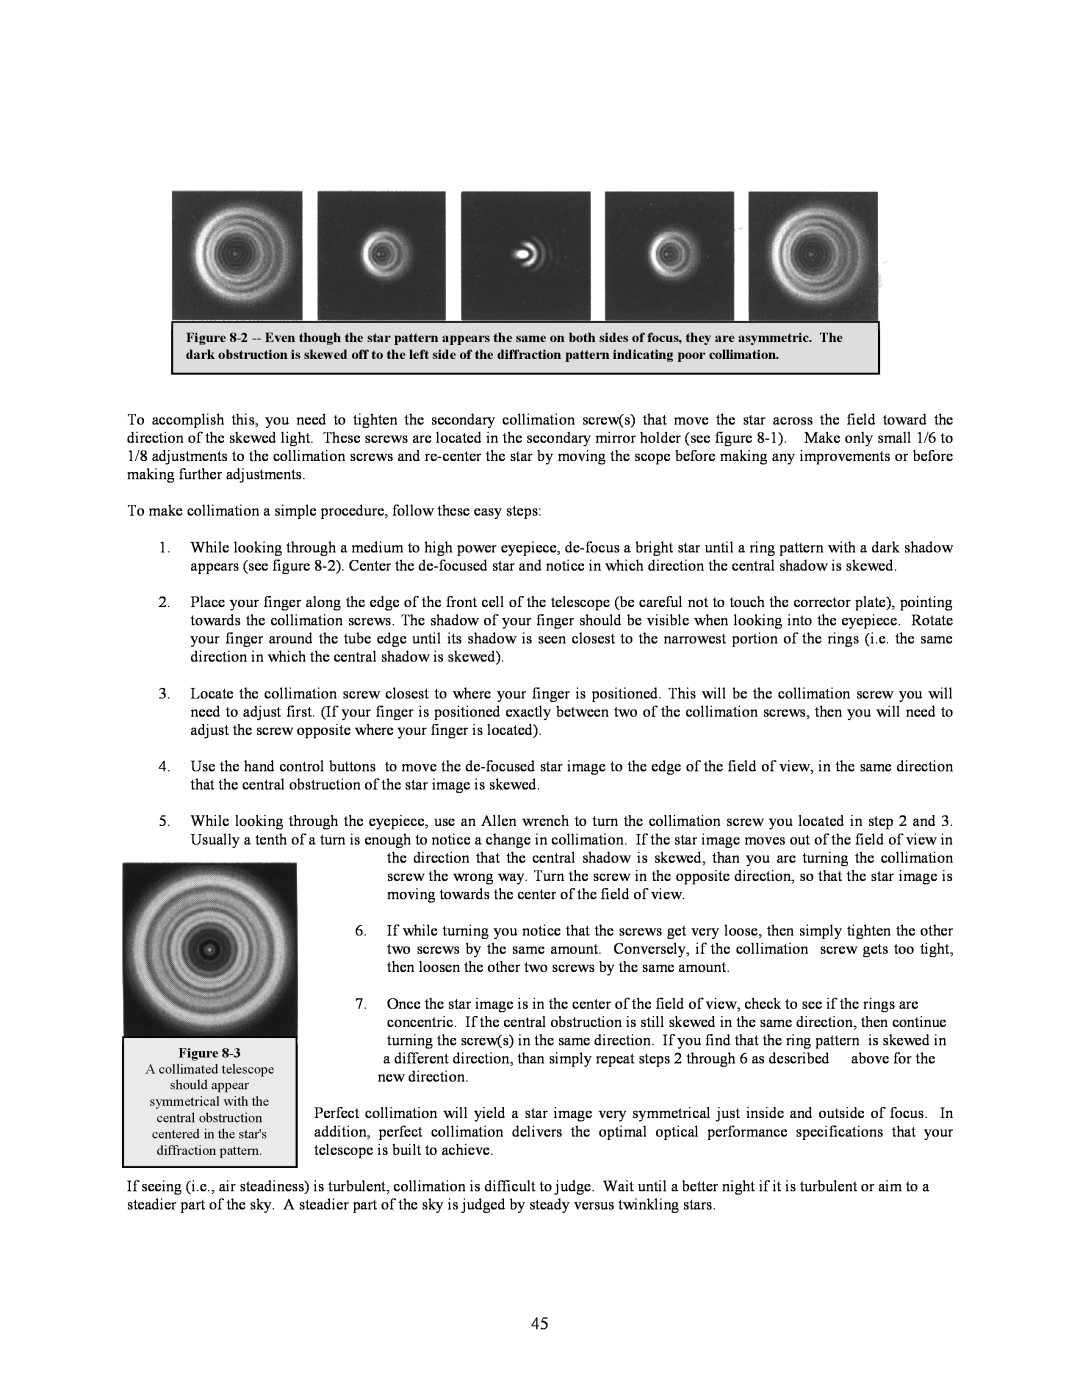 Celestron C8-S, C5-S, C9.25-S instruction manual To make collimation a simple procedure, follow these easy steps 